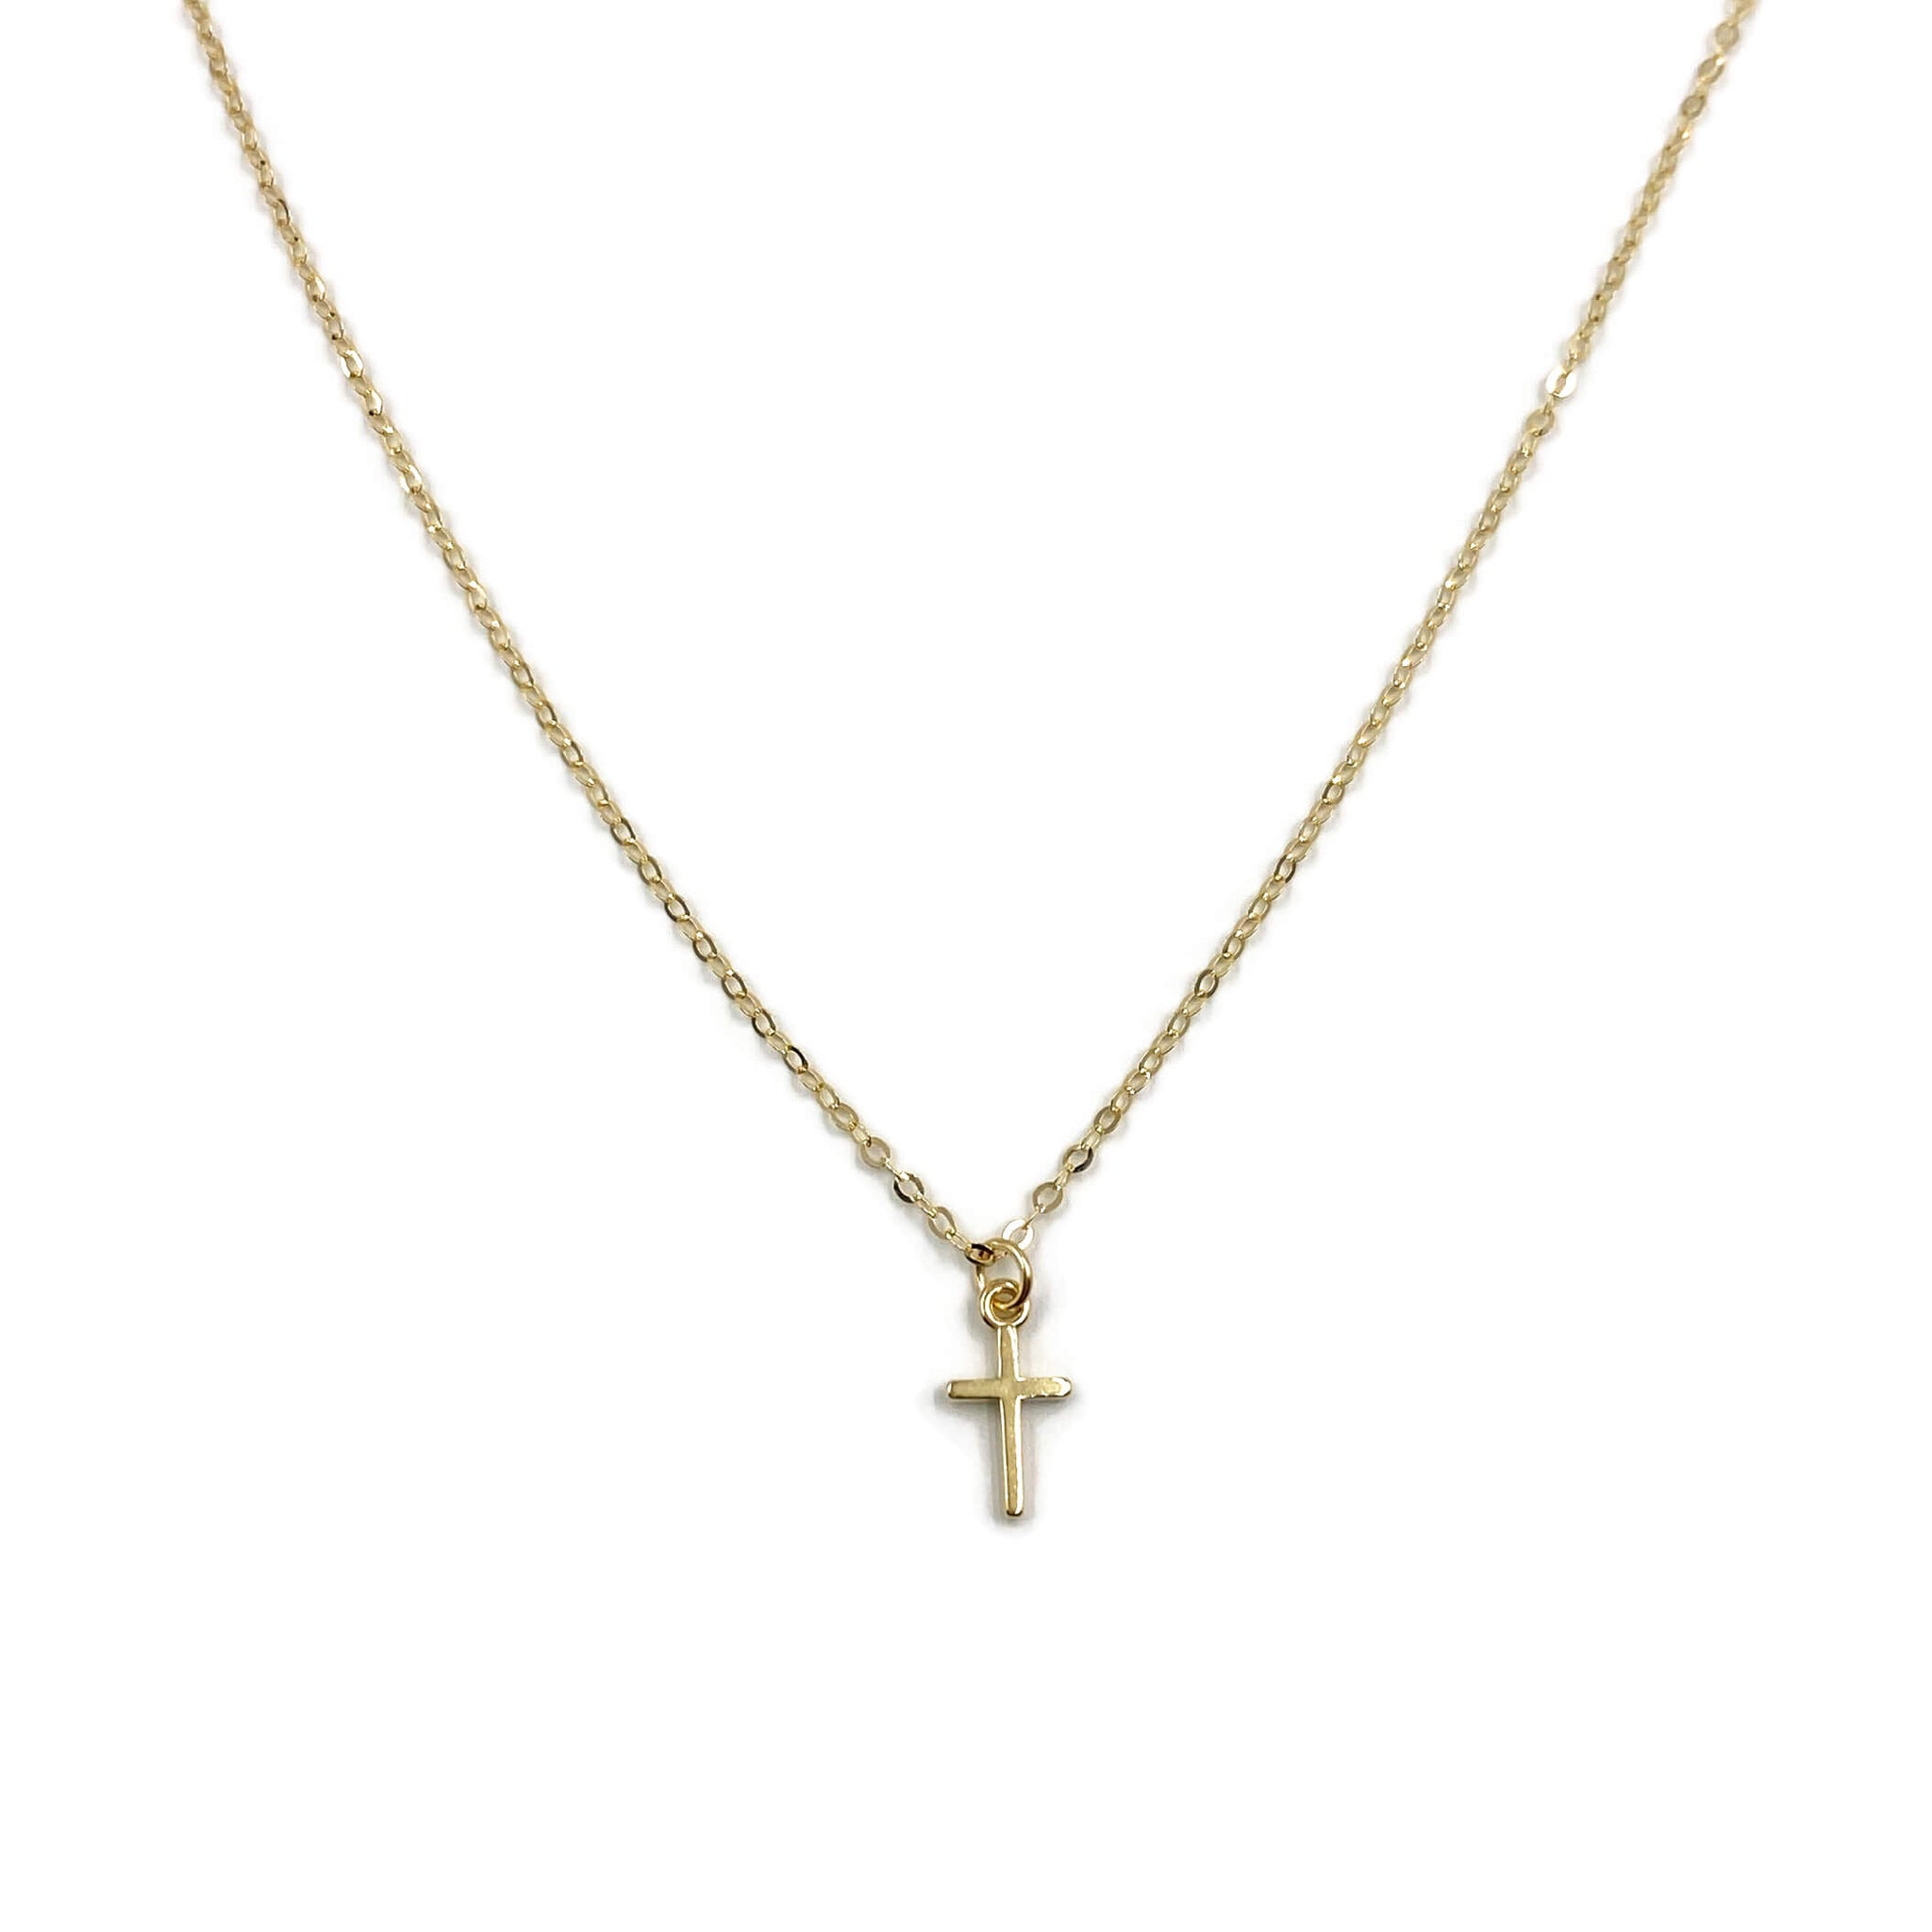 This is a 14k gold cross necklace that's made of 14k gold chain and 14k gold cross.